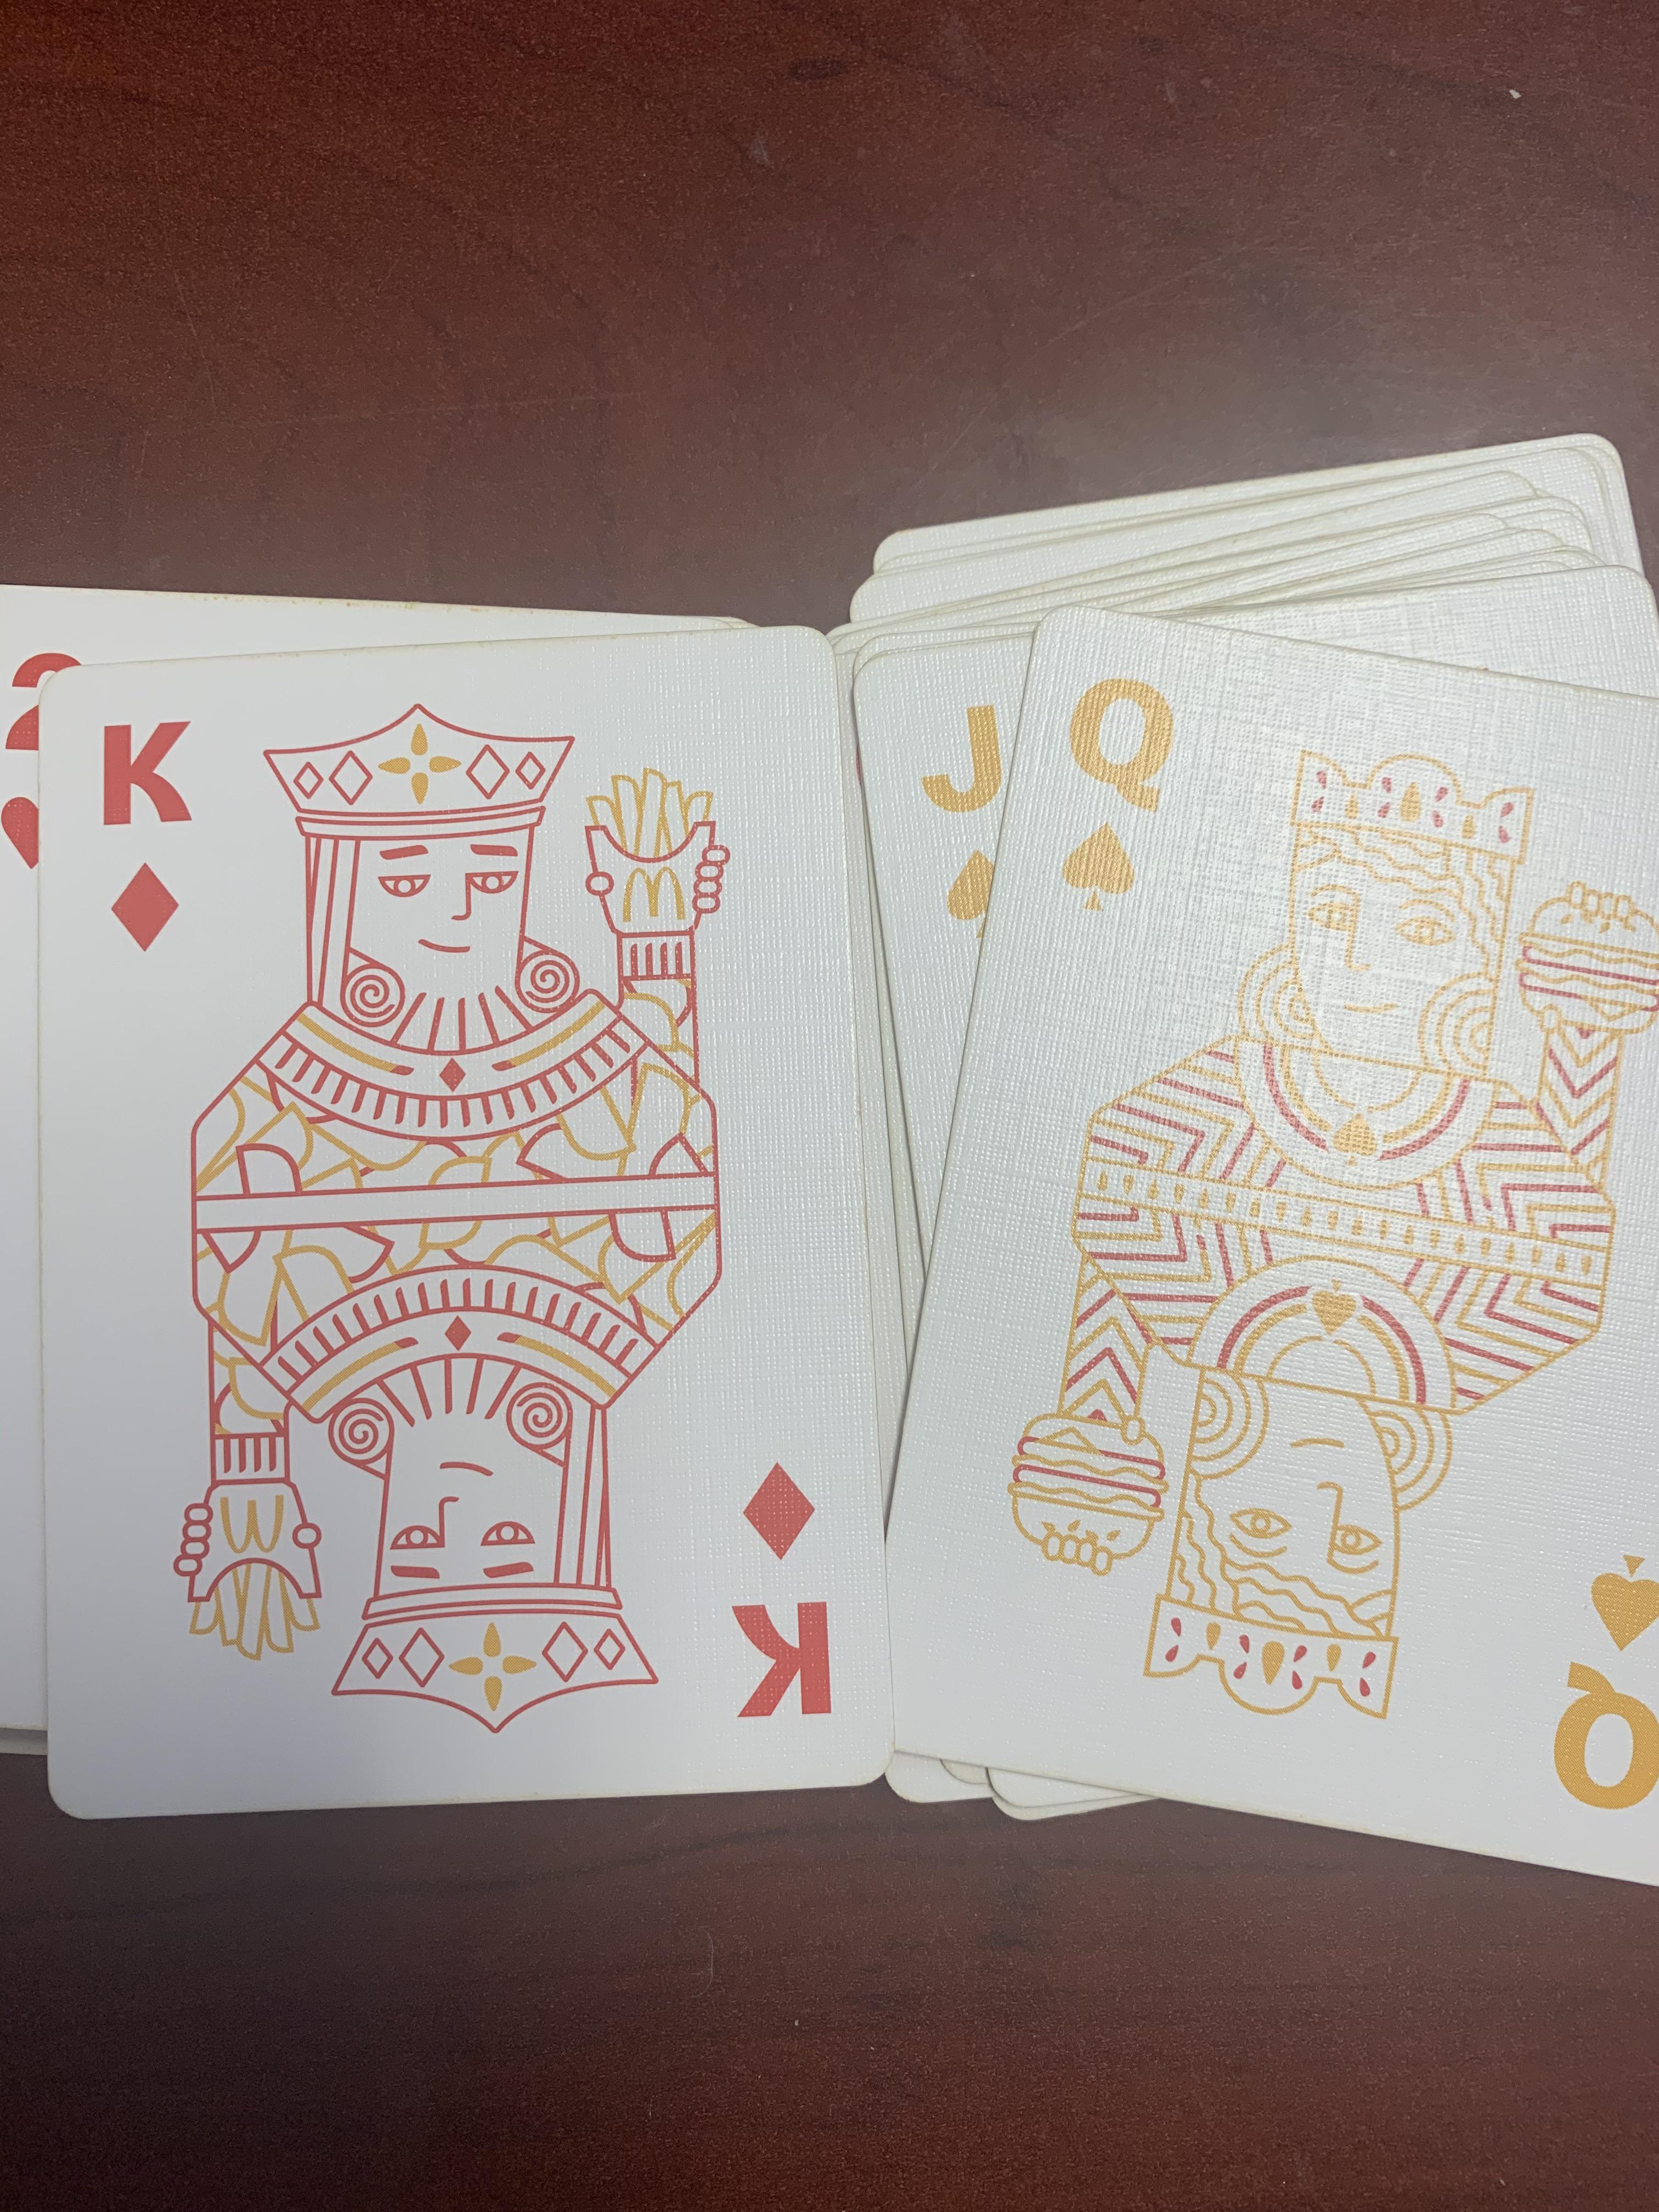 McDonald's themed deck has the queen holding the burger... for reasons.